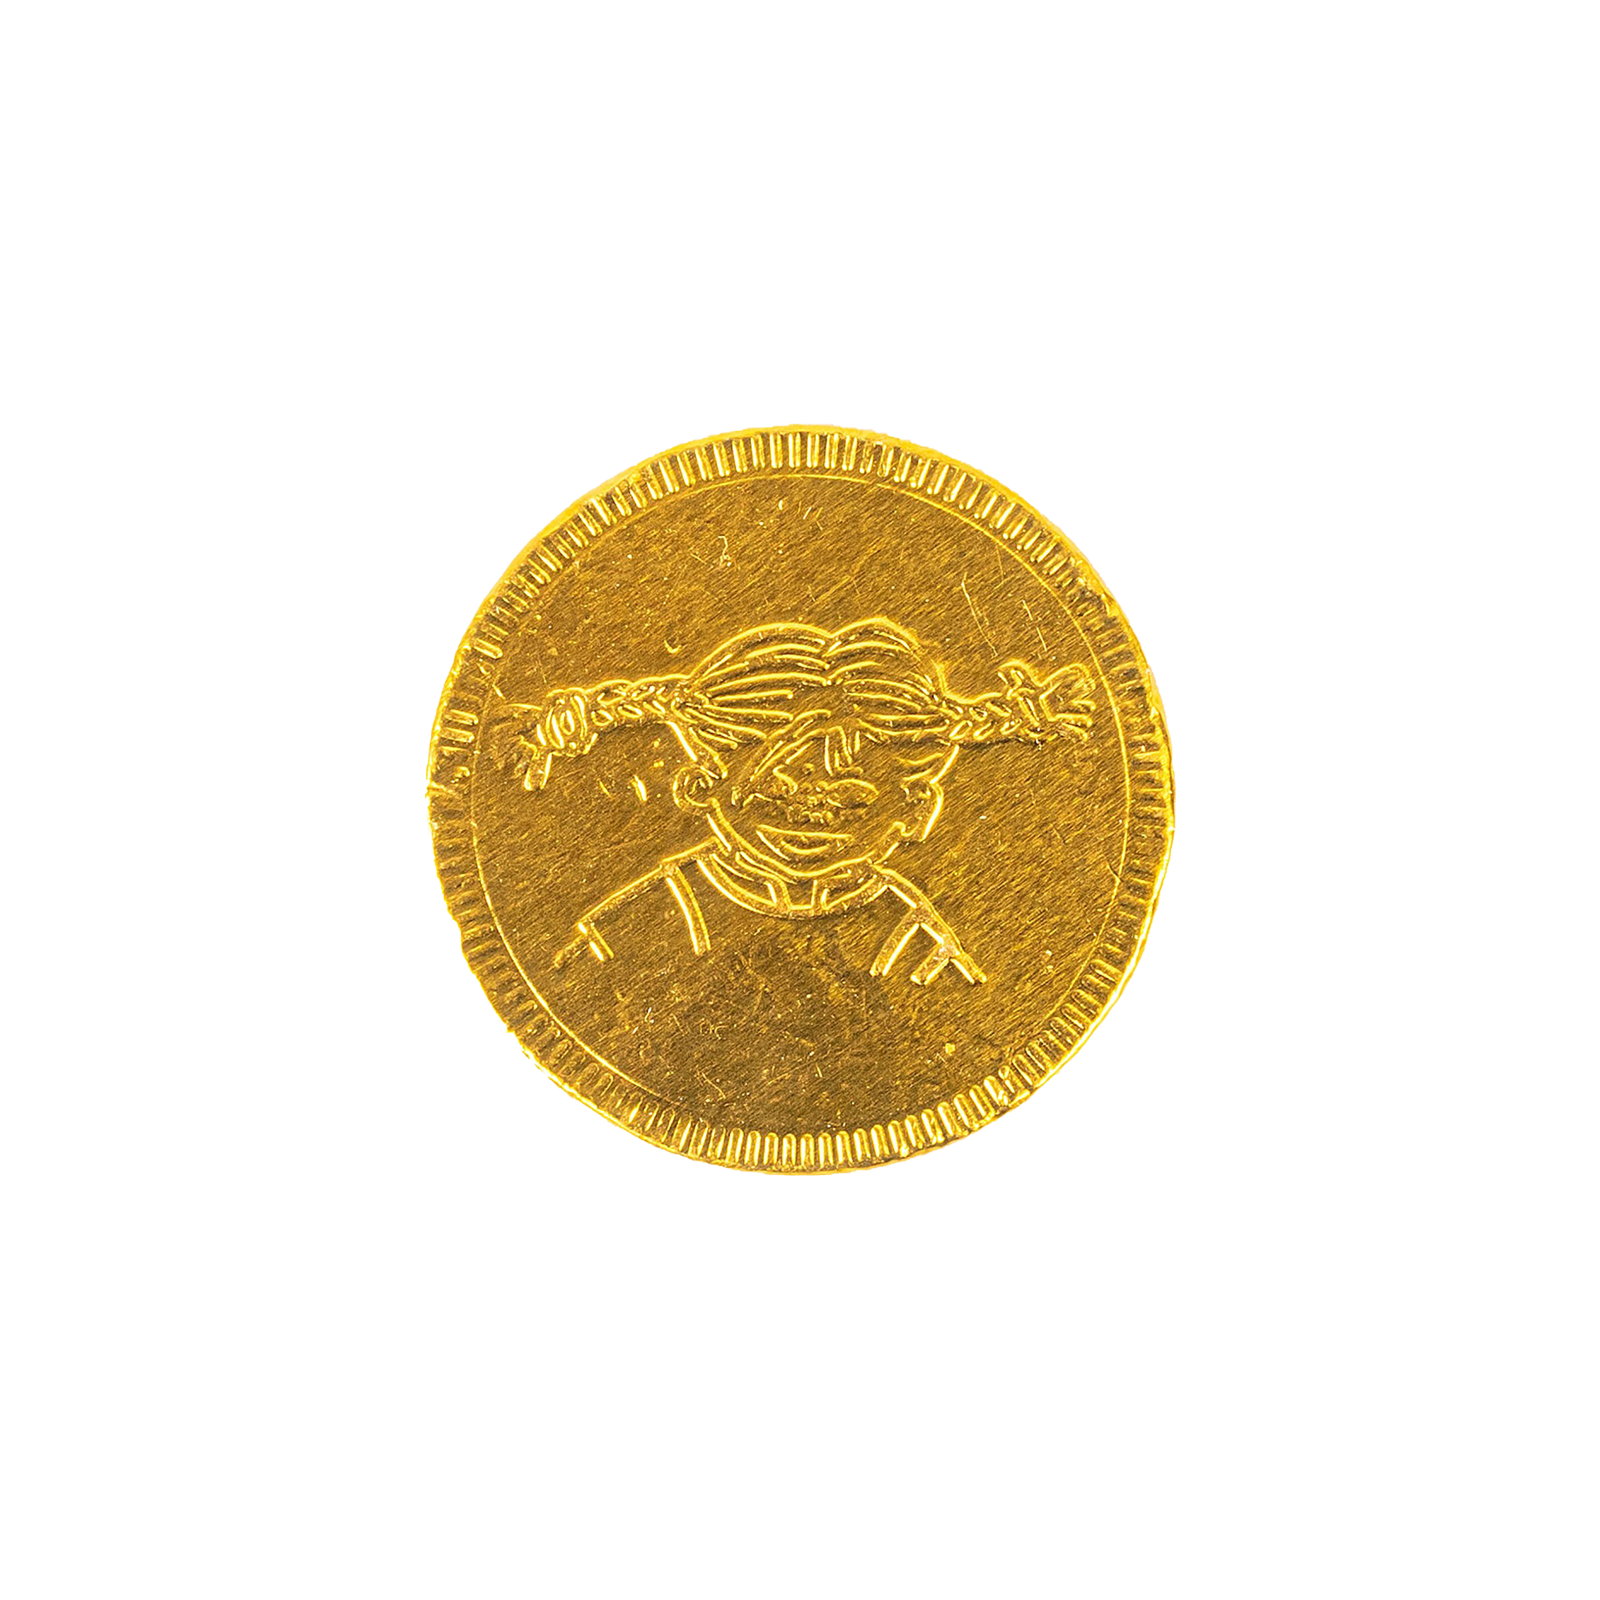 Pippis chocolate gold coin